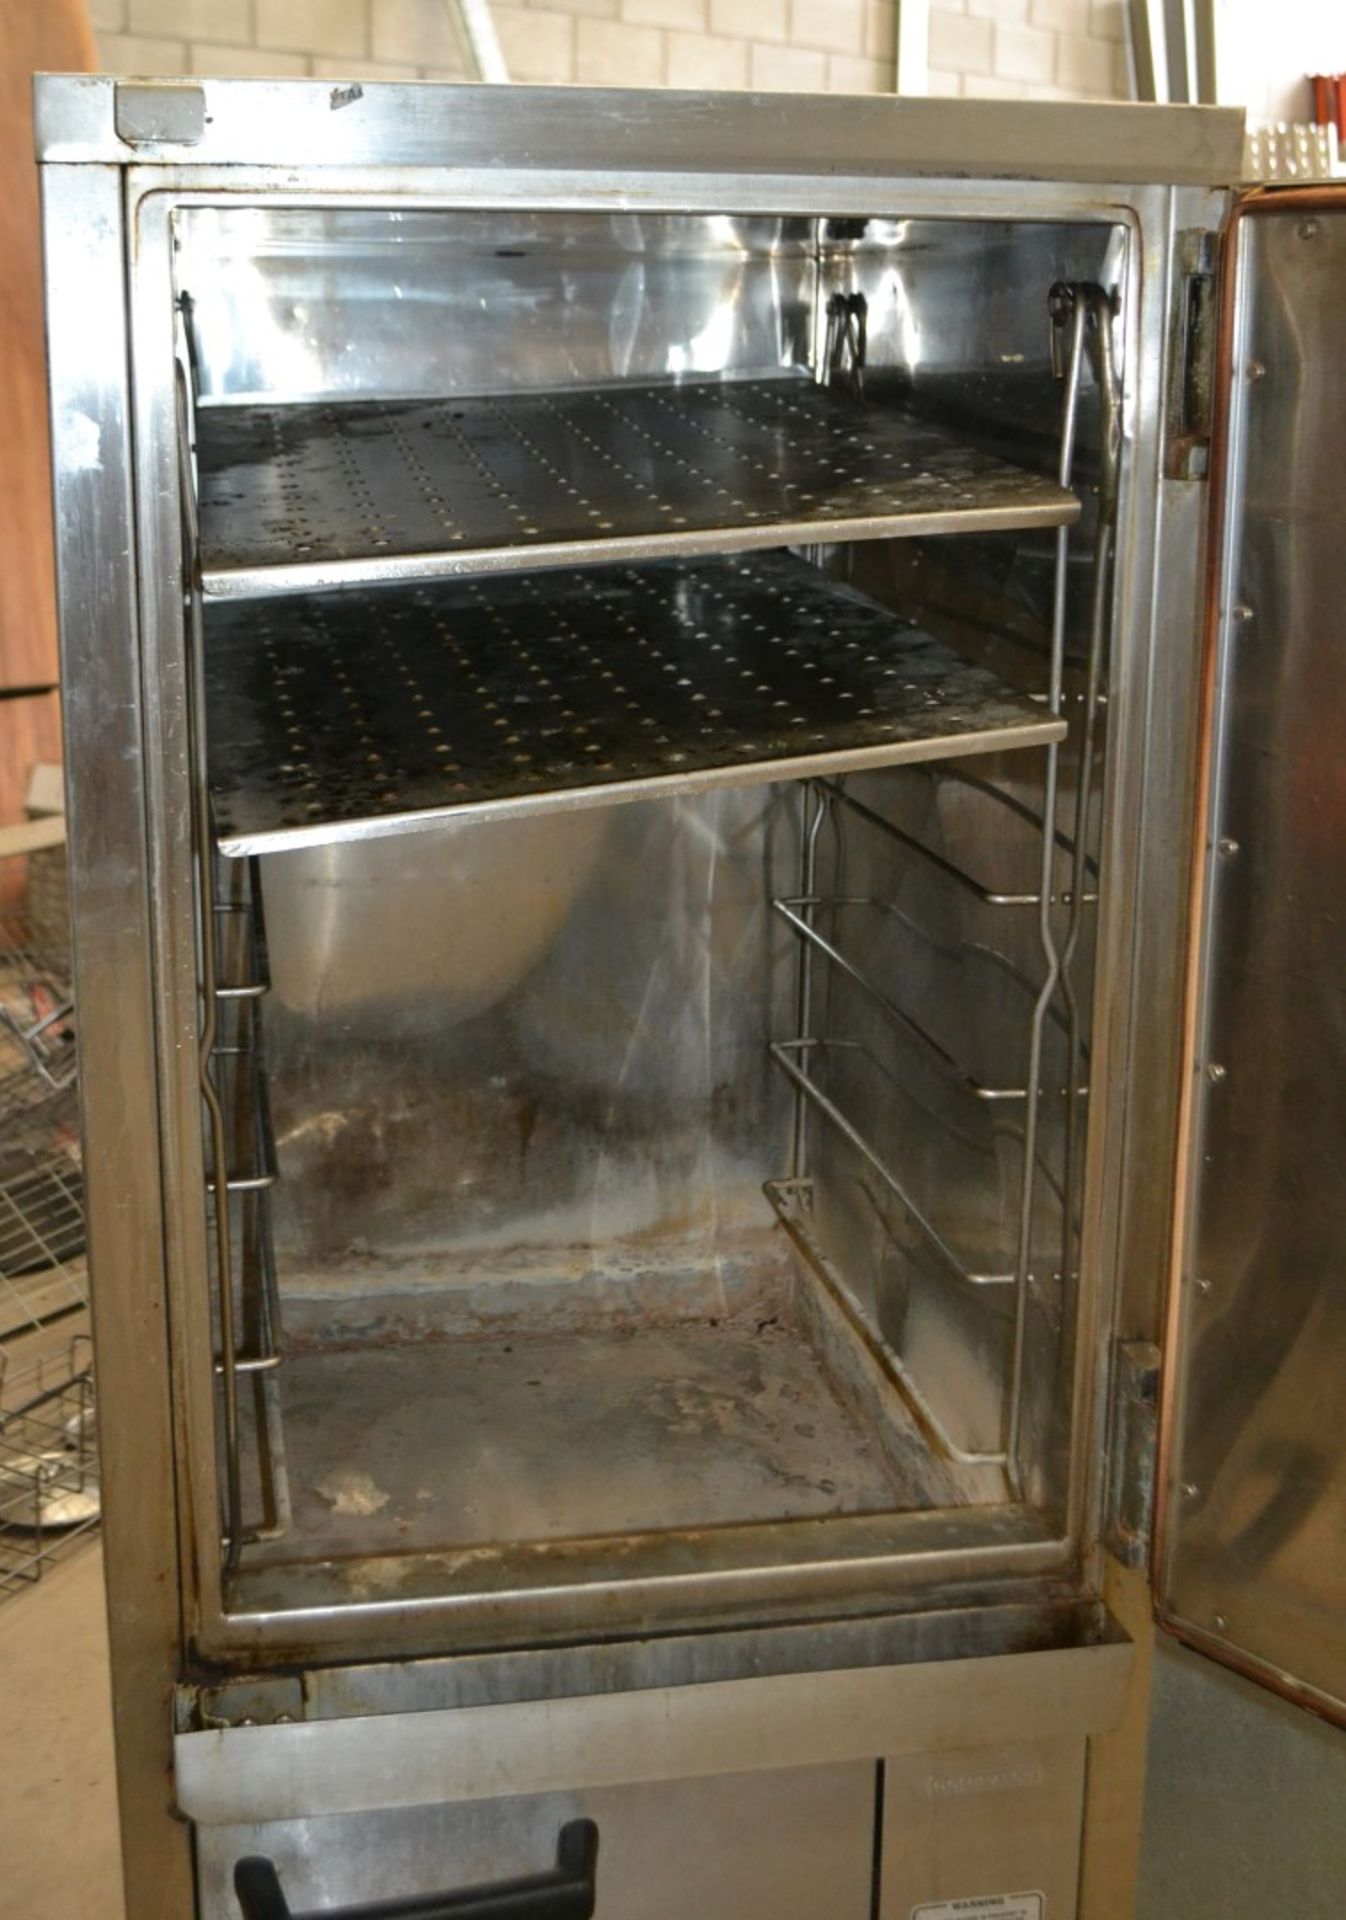 1 x Falcon Commercial Kitchen Steamer Oven - Natural Gas - Model G6478 - CL435 - Location: - Image 6 of 6